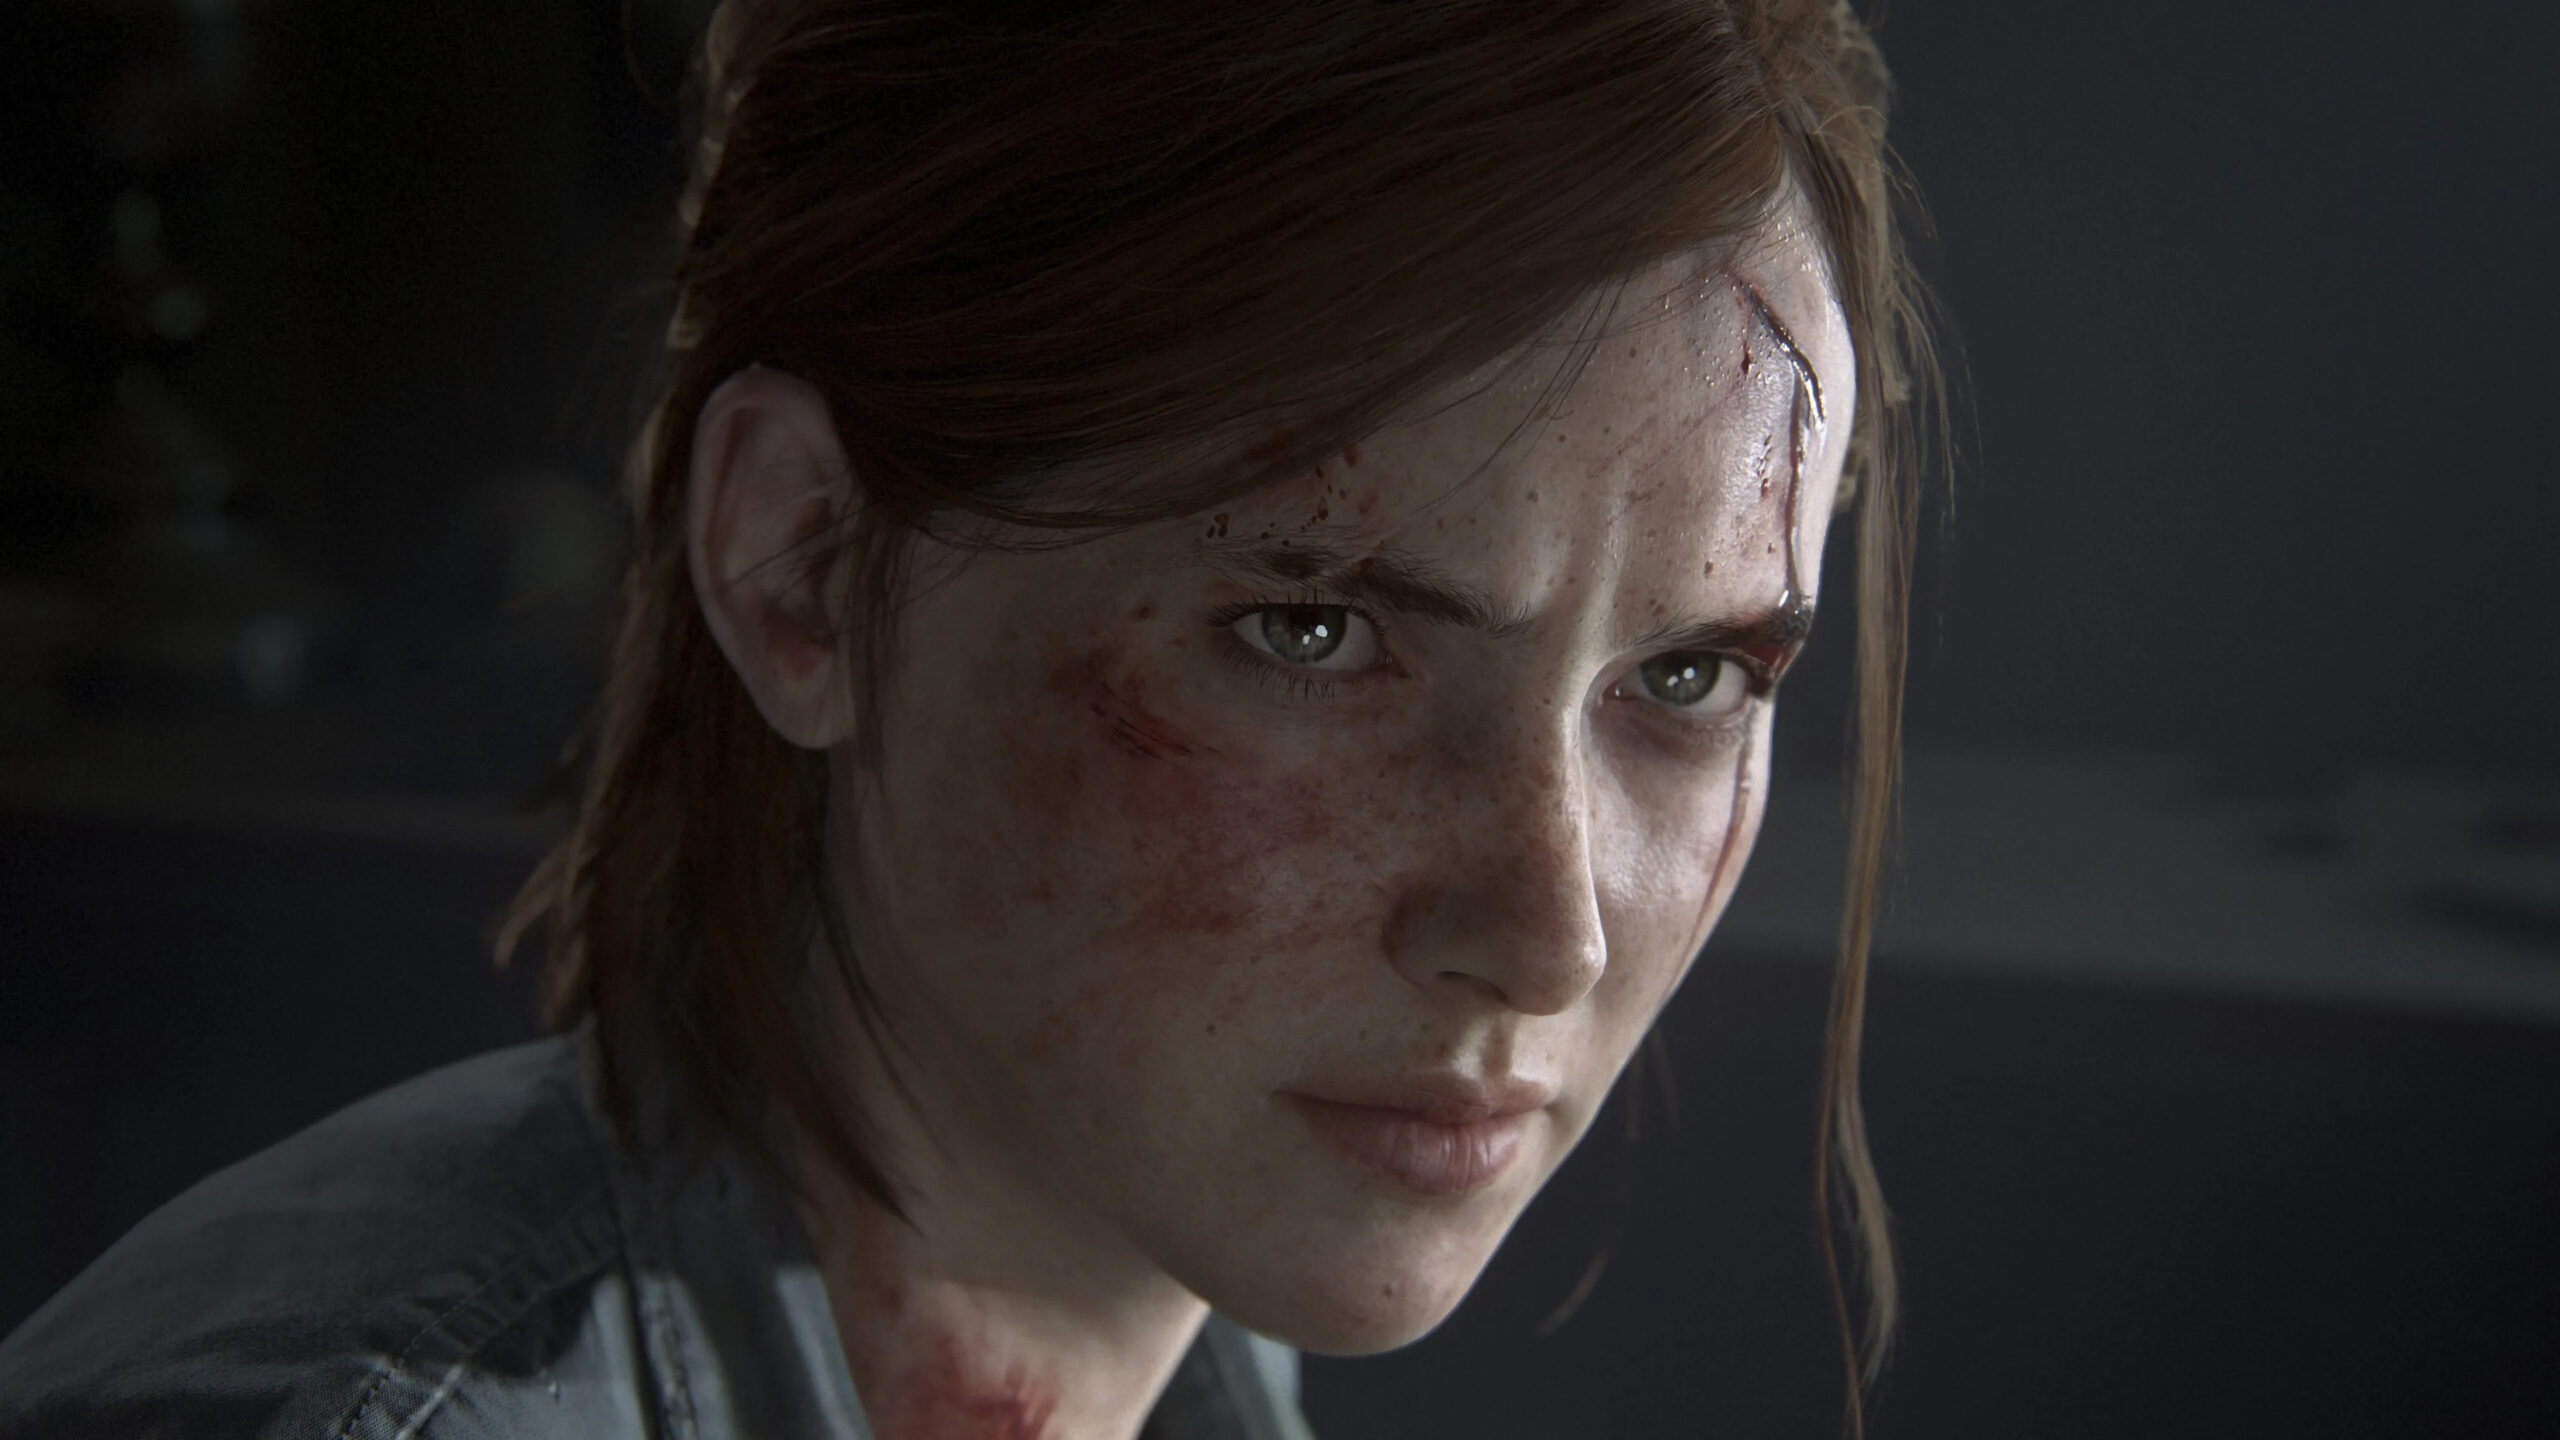 The “everything is political” crowd blasts Last of Us’ Neil Druckmann for being political